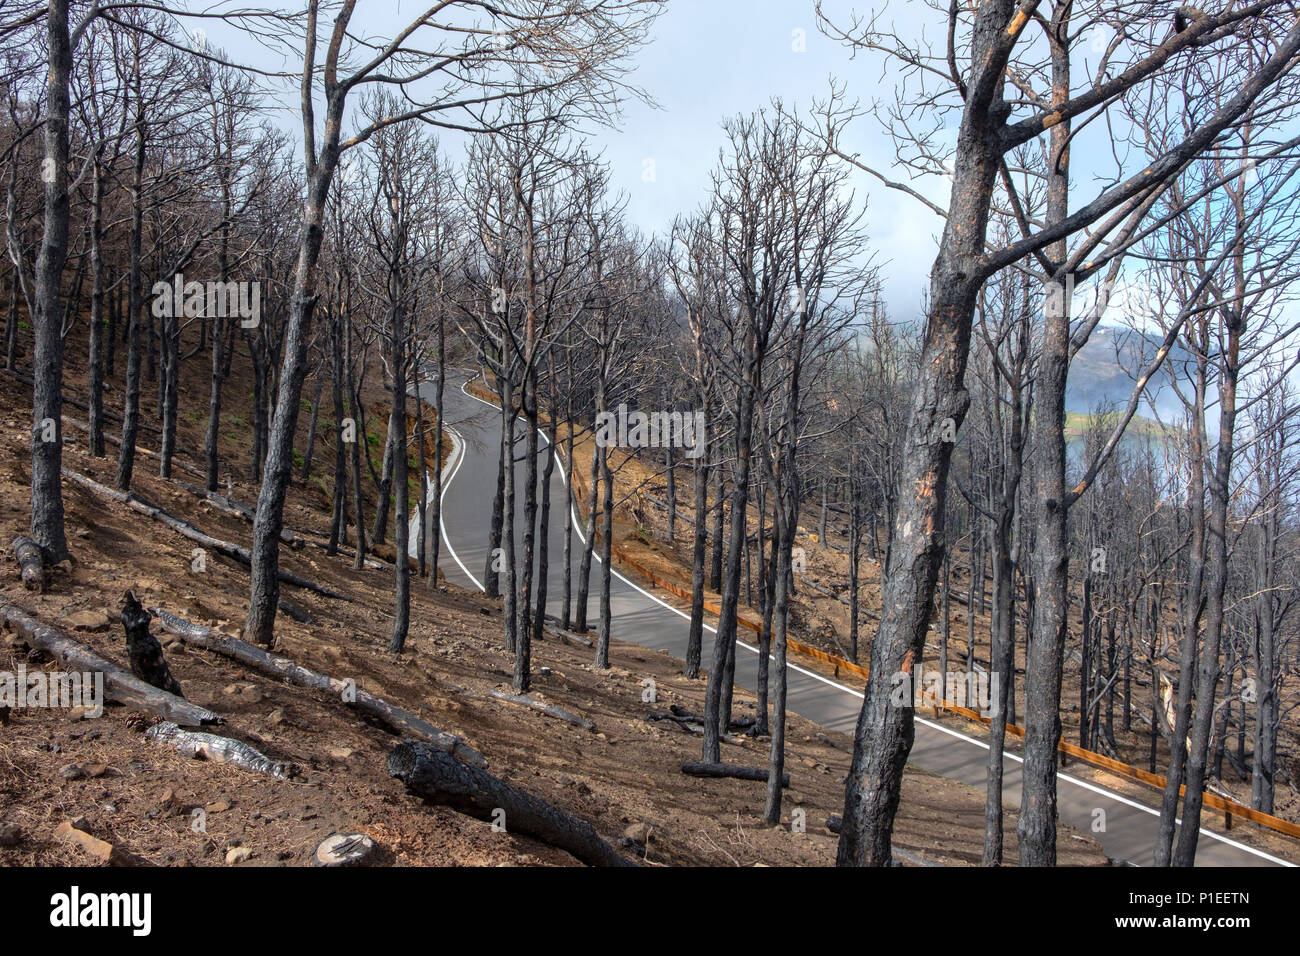 Burnt trees after a forest fire, Gran Canaria, Canary Islands, Spain Stock Photo